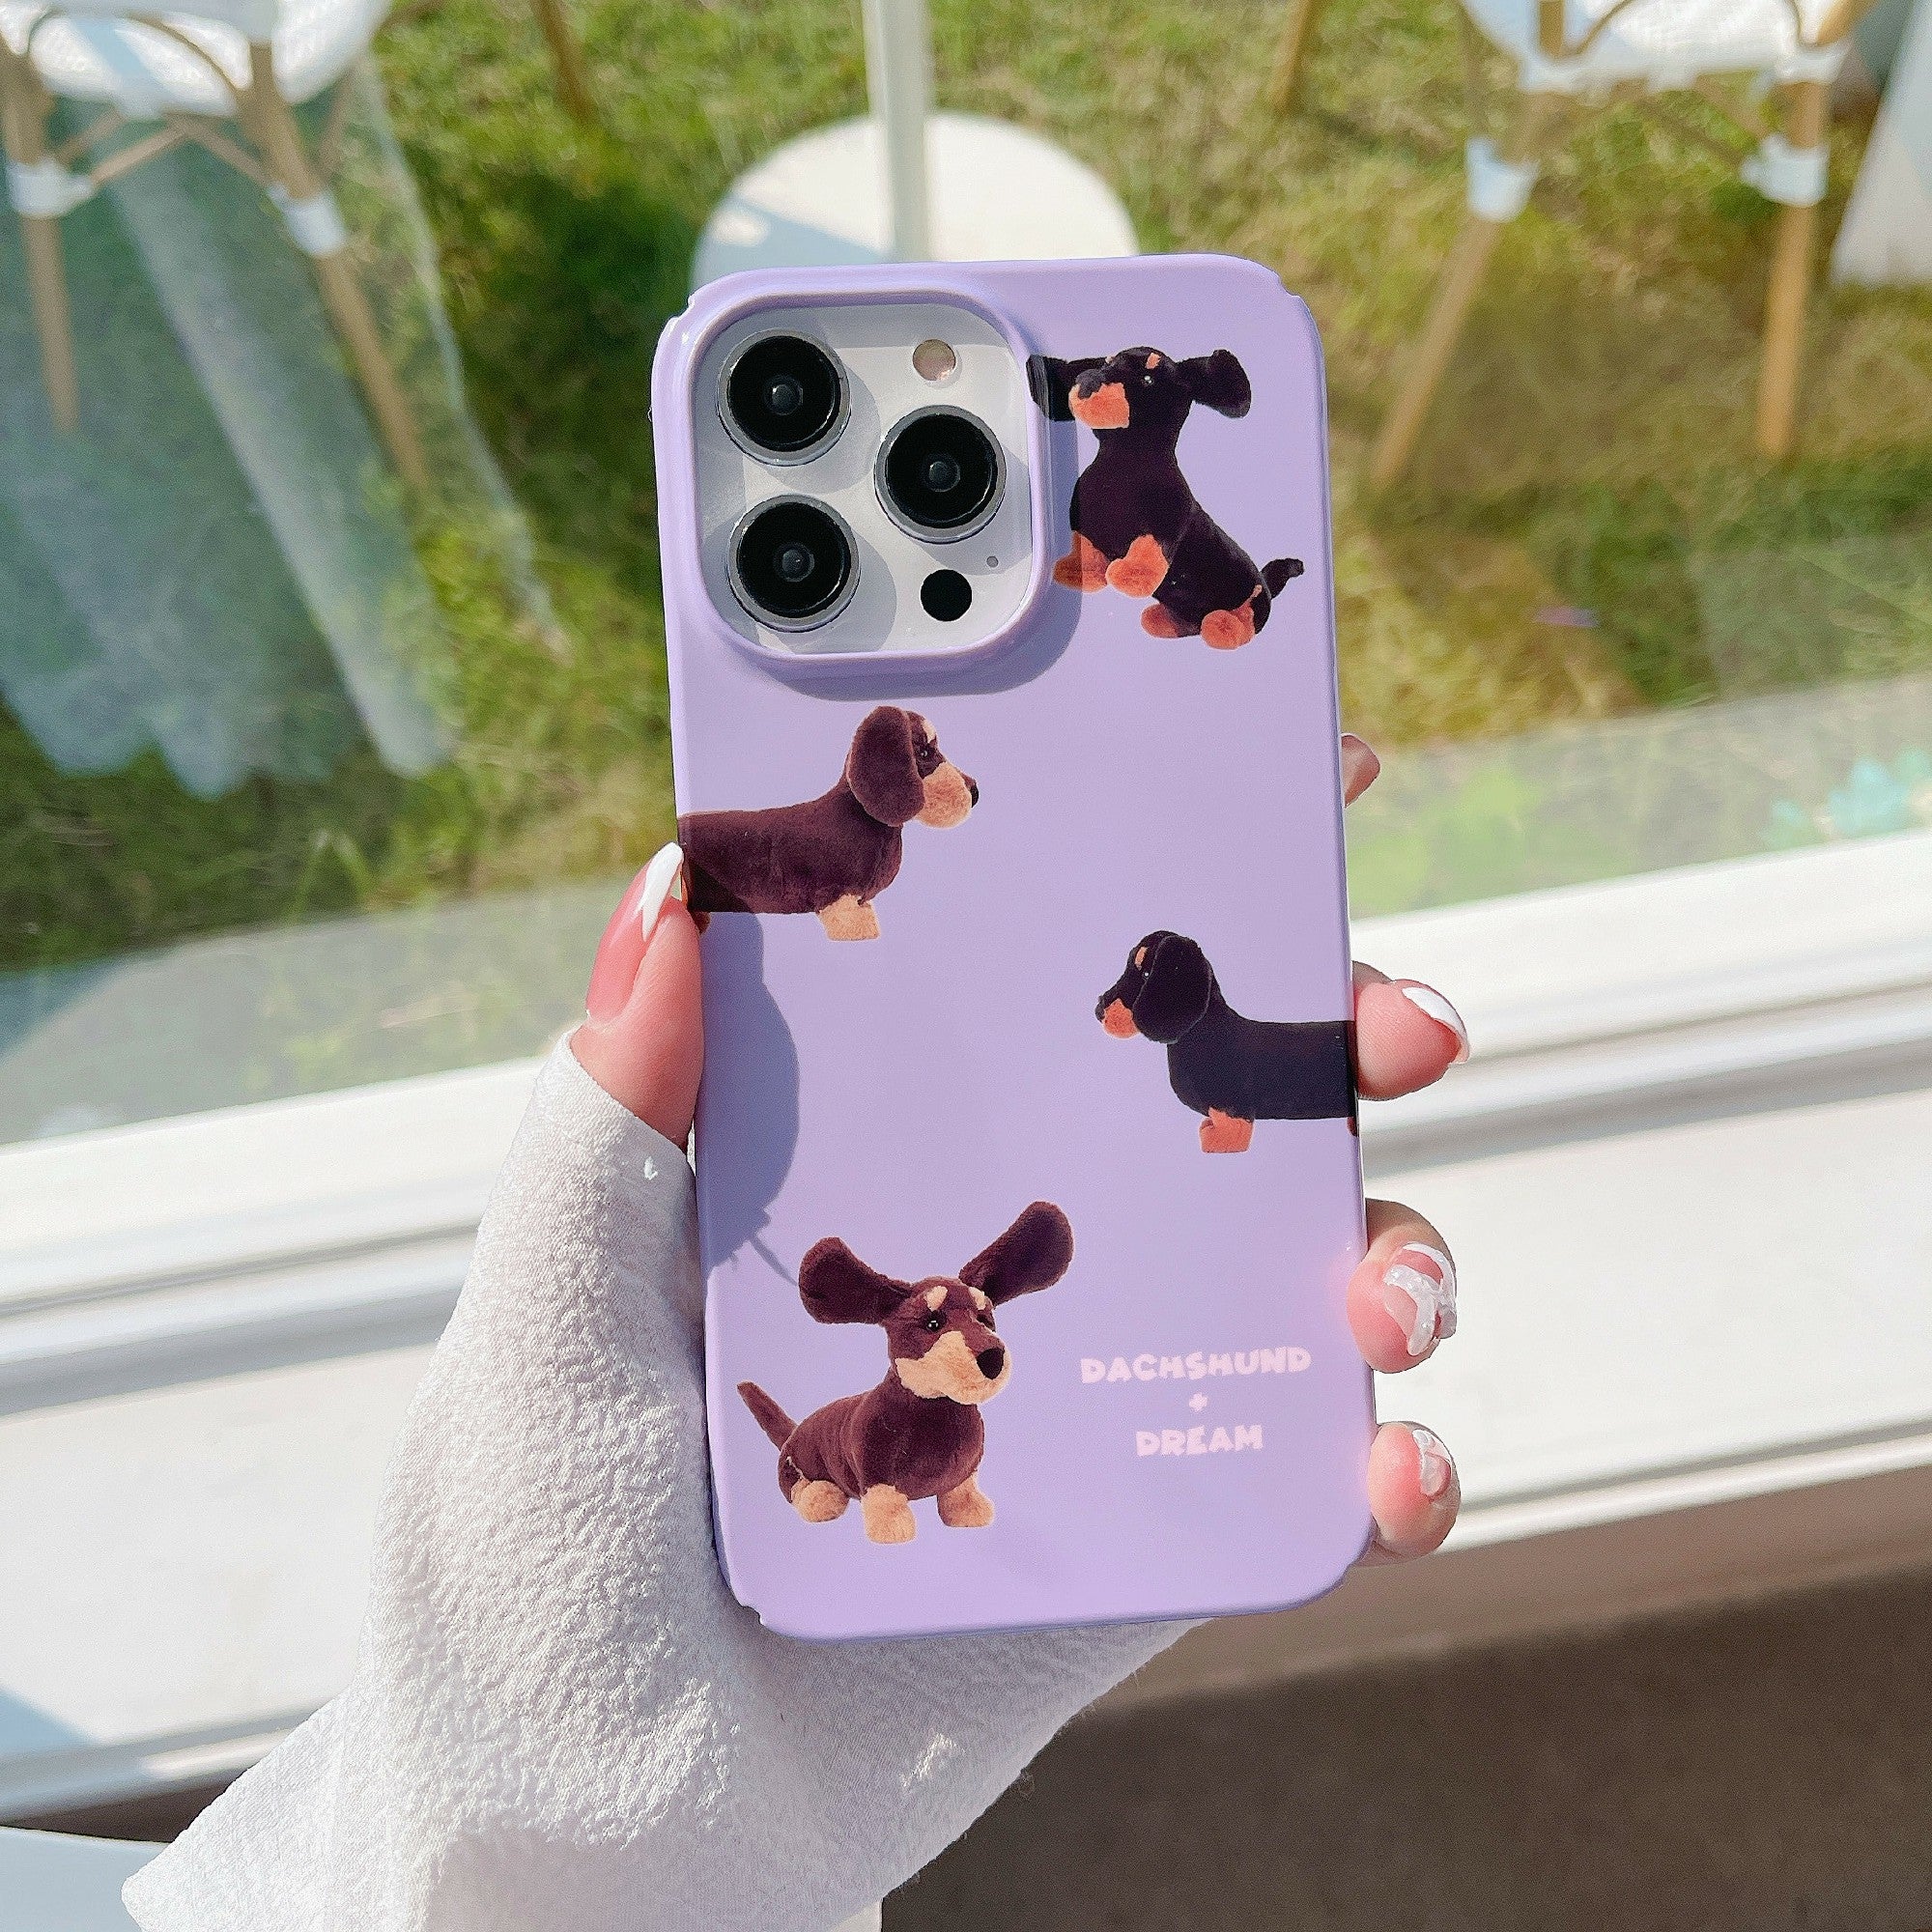 Uniqkart for iPhone 12 Pro Max 6.7 inch Hard PC Phone Case Pattern Printing Protective Glossy Phone Shell - Dachshund Dog